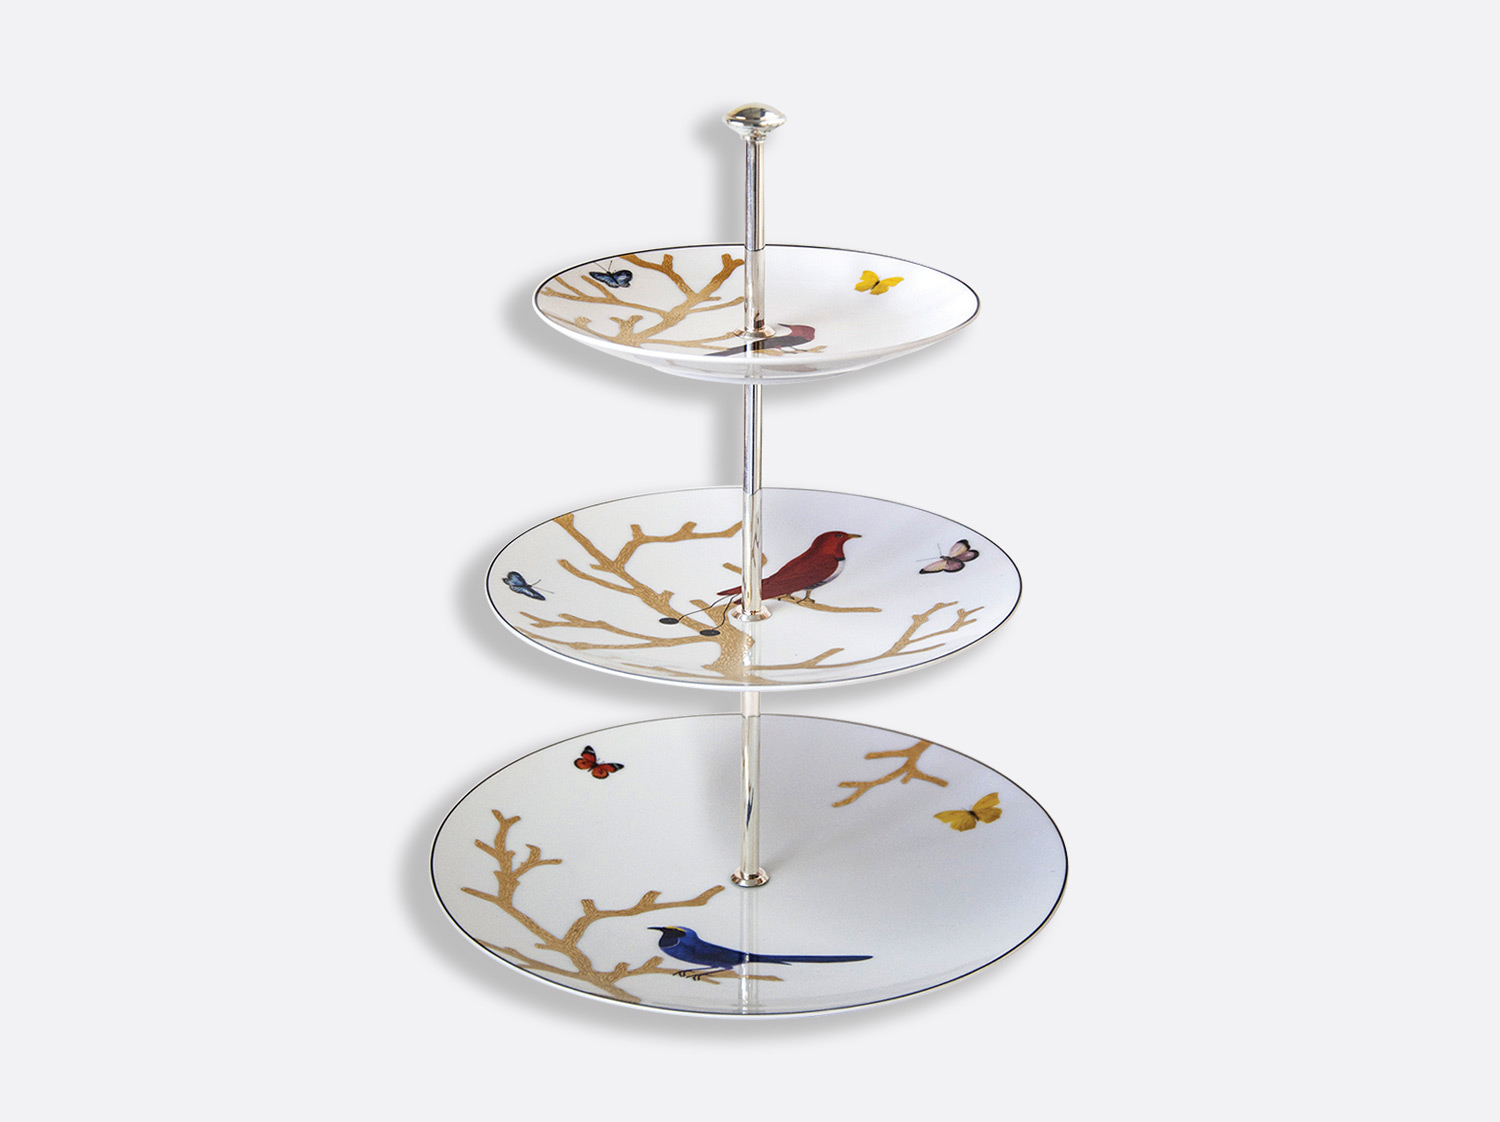 China 3 tier tray of the collection Aux oiseaux | Bernardaud